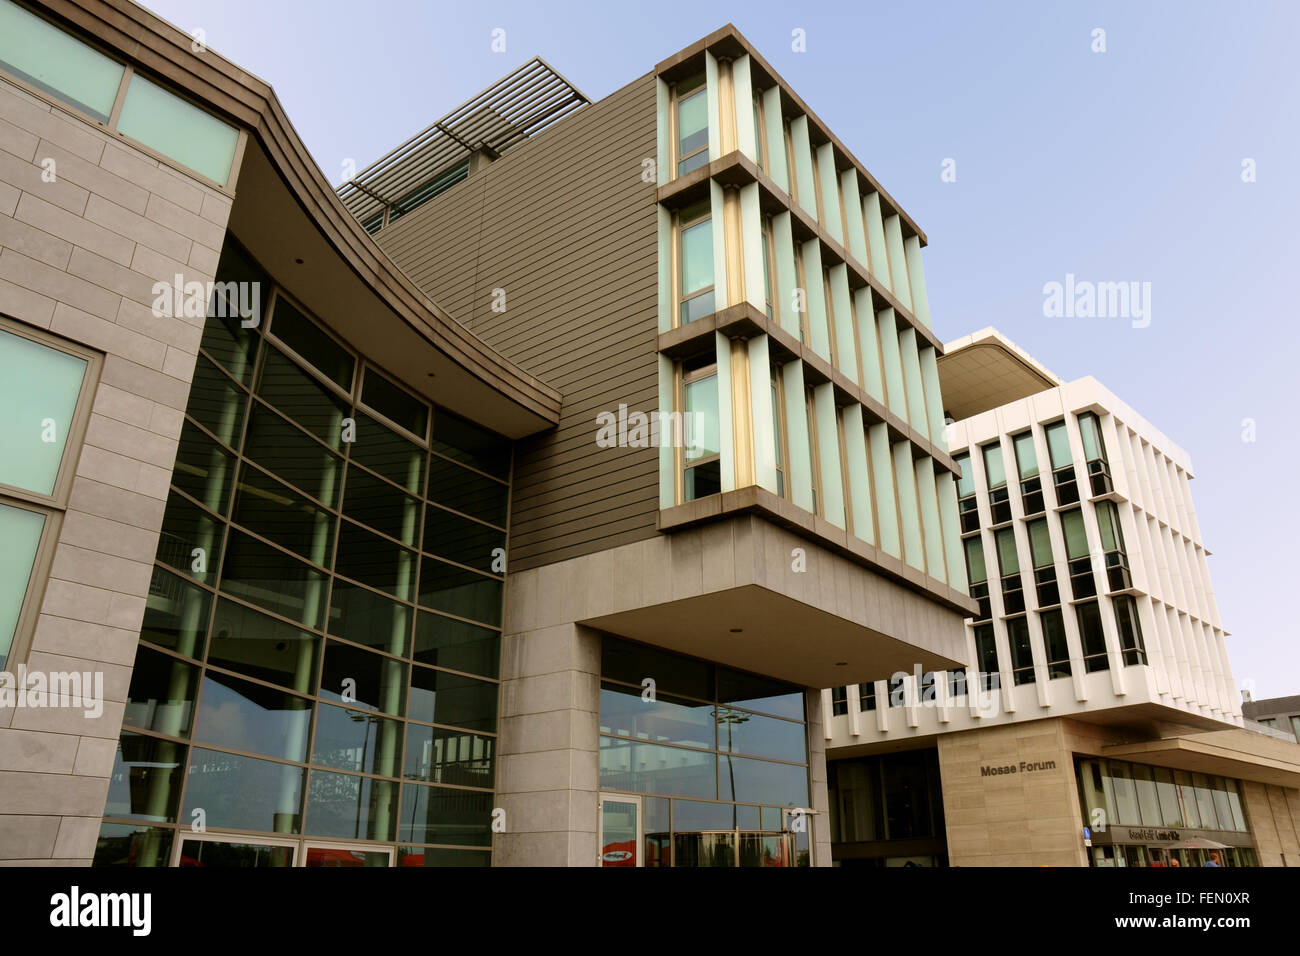 Exterieur of the Mosae Forum Complex (designed by Maastricht architect Jo Coenen). Stock Photo